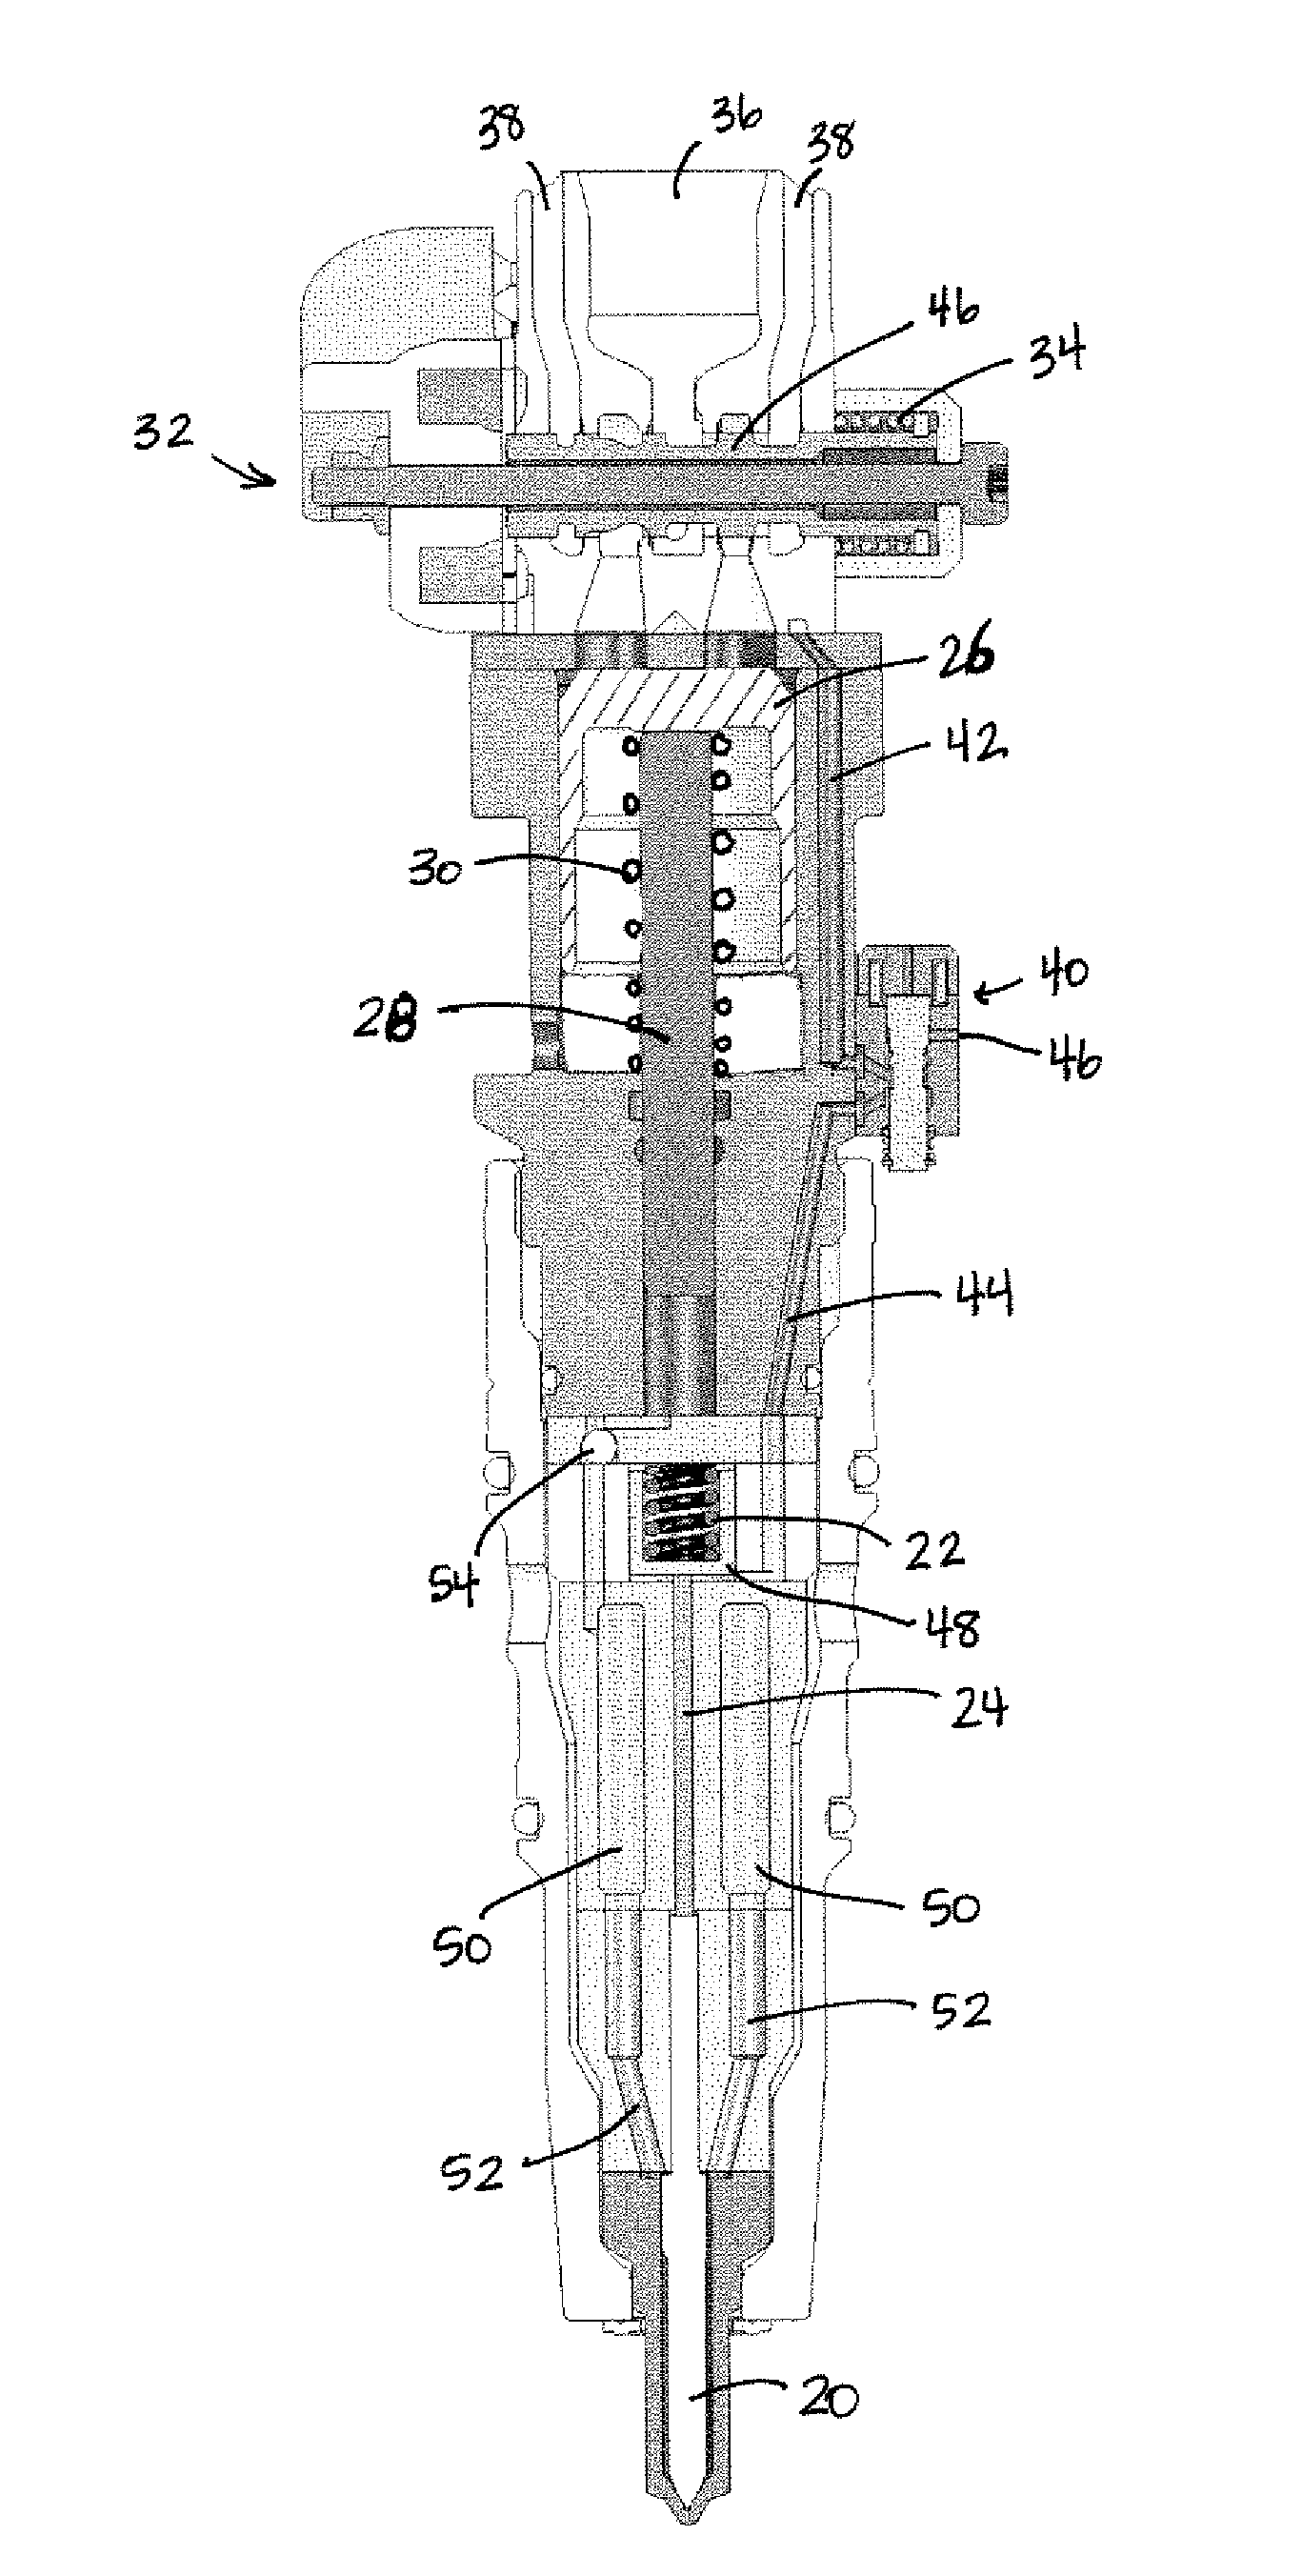 Fuel Injectors with Intensified Fuel Storage and Methods of Operating an Engine Therewith